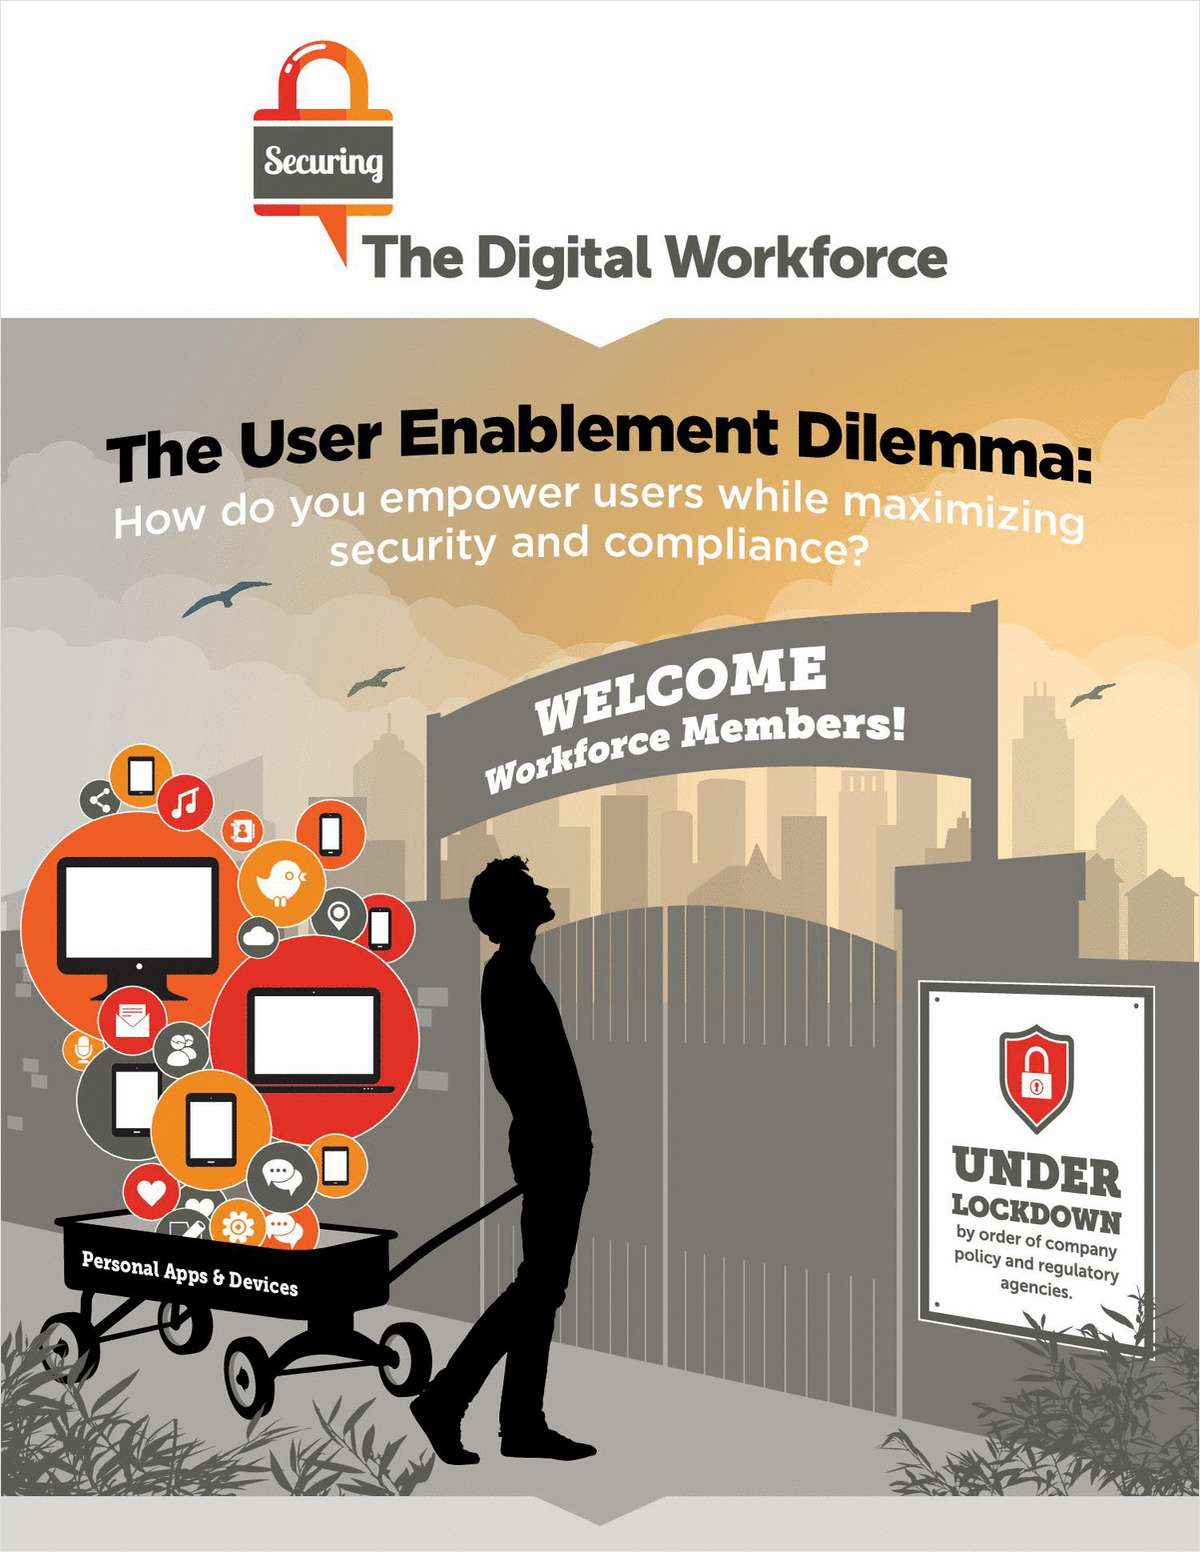 The User Enablement Dilemma